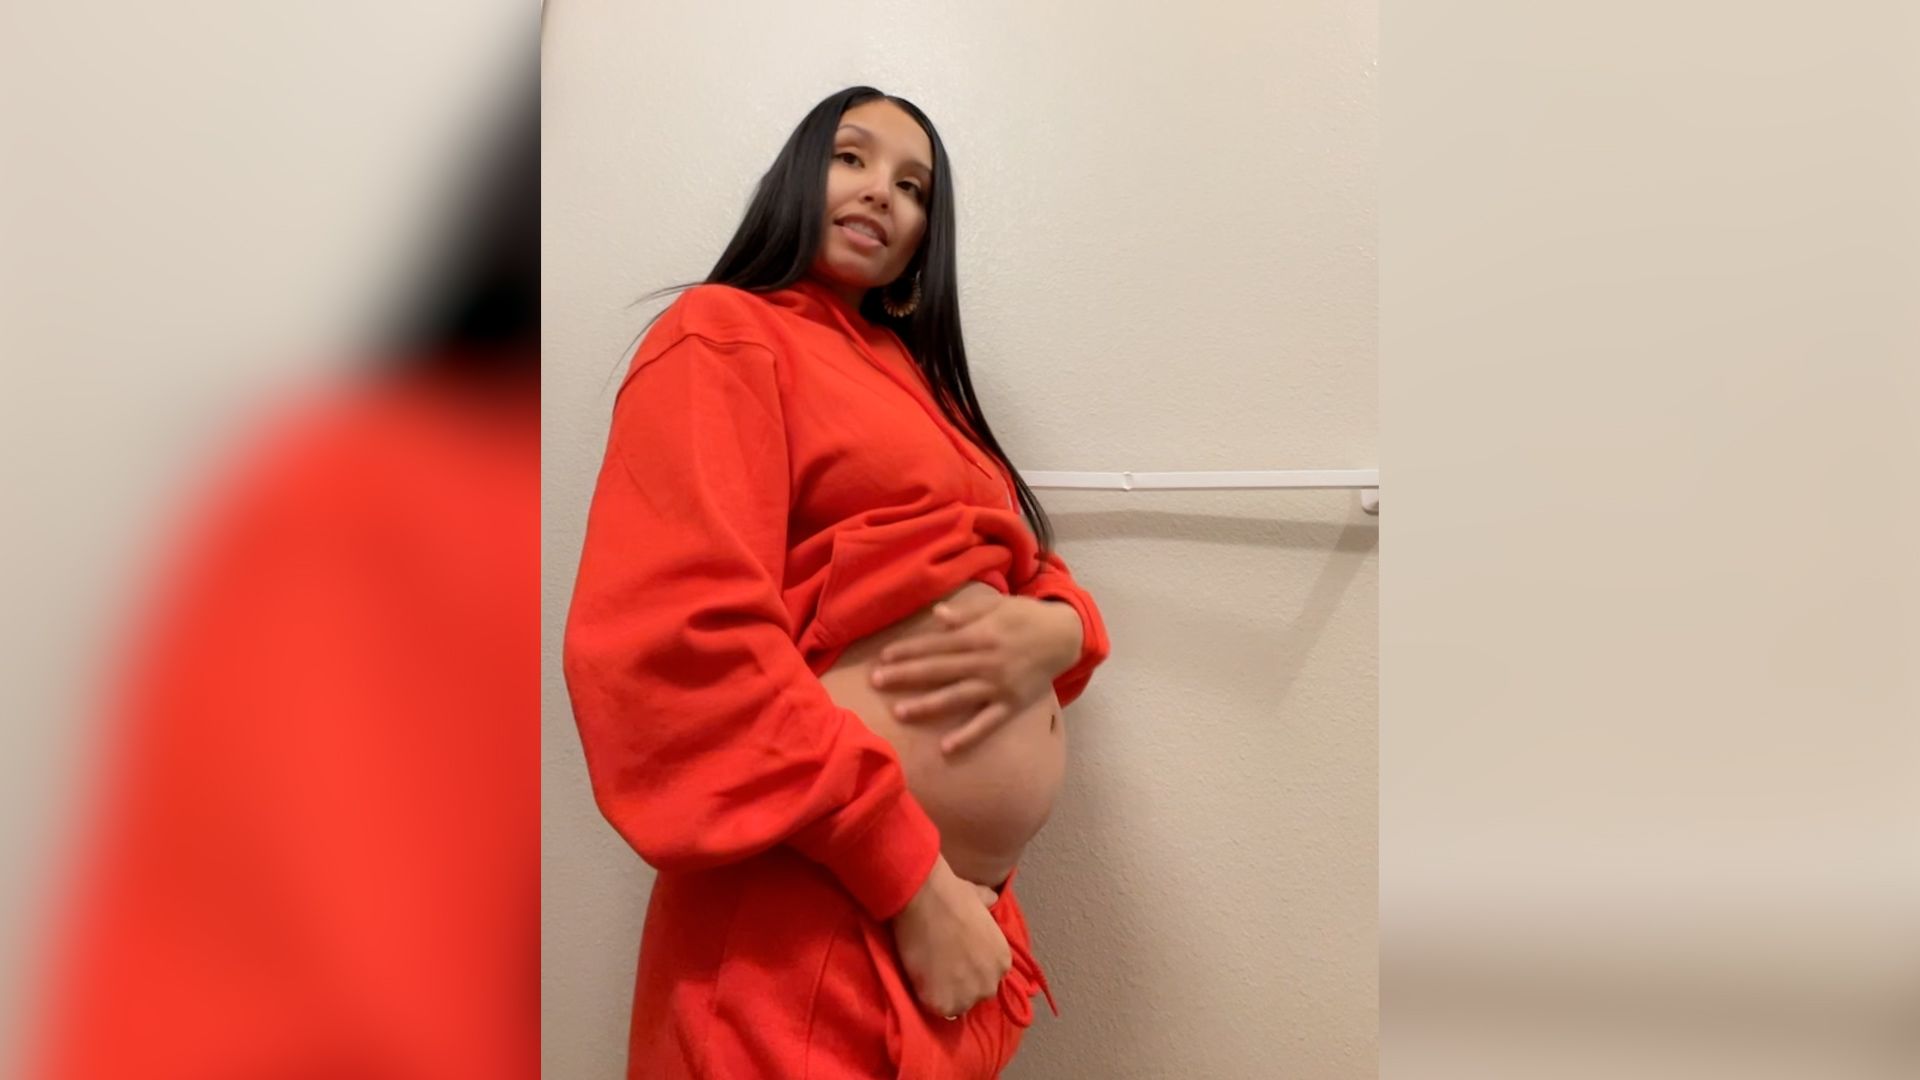 A childbirth myth is spreading on TikTok. Doctors say the truth is